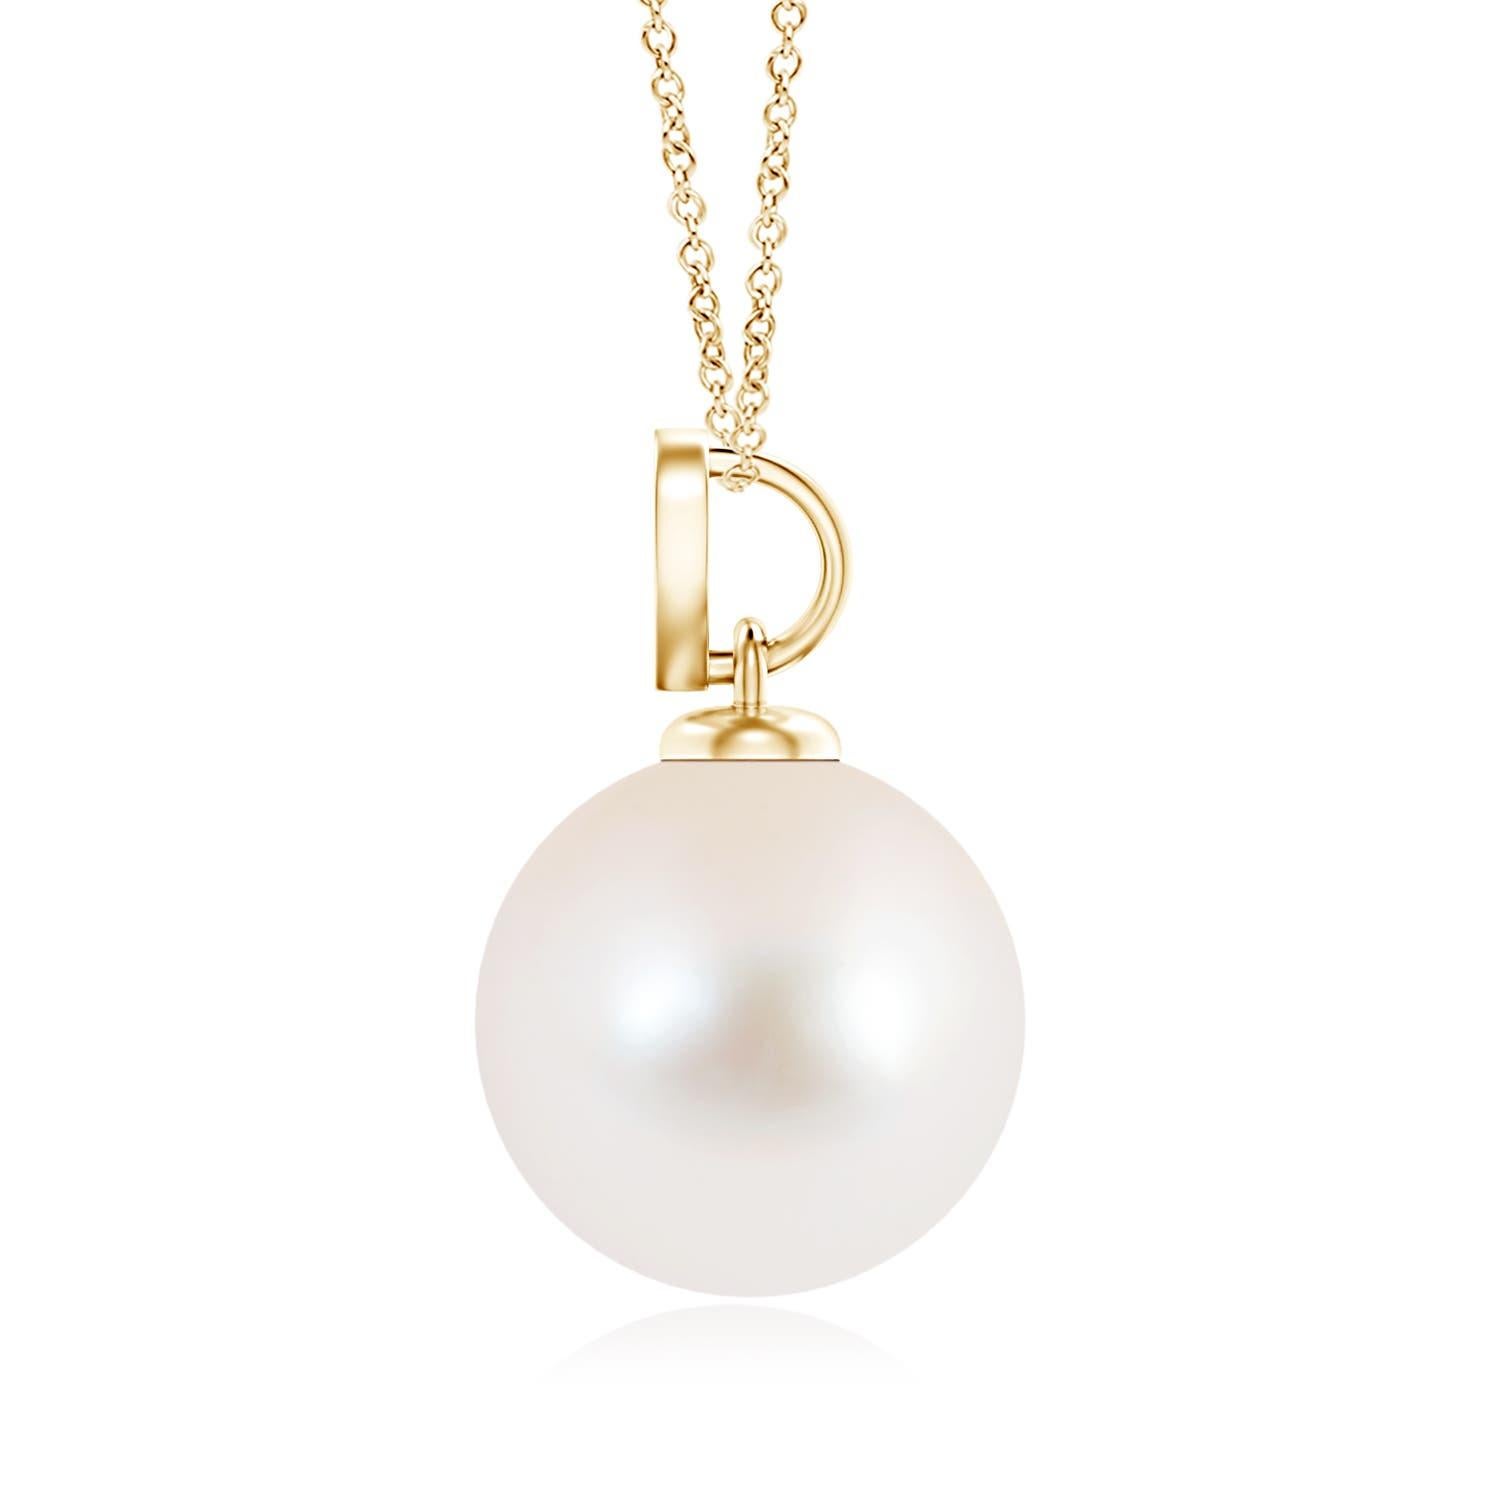 Nothing connotes love better than this charming diamond heart pendant in 14K yellow gold. It features a round Freshwater cultured pearl that illuminates with its delightful hue, while the diamond studded heart motif adds a romantic touch to the